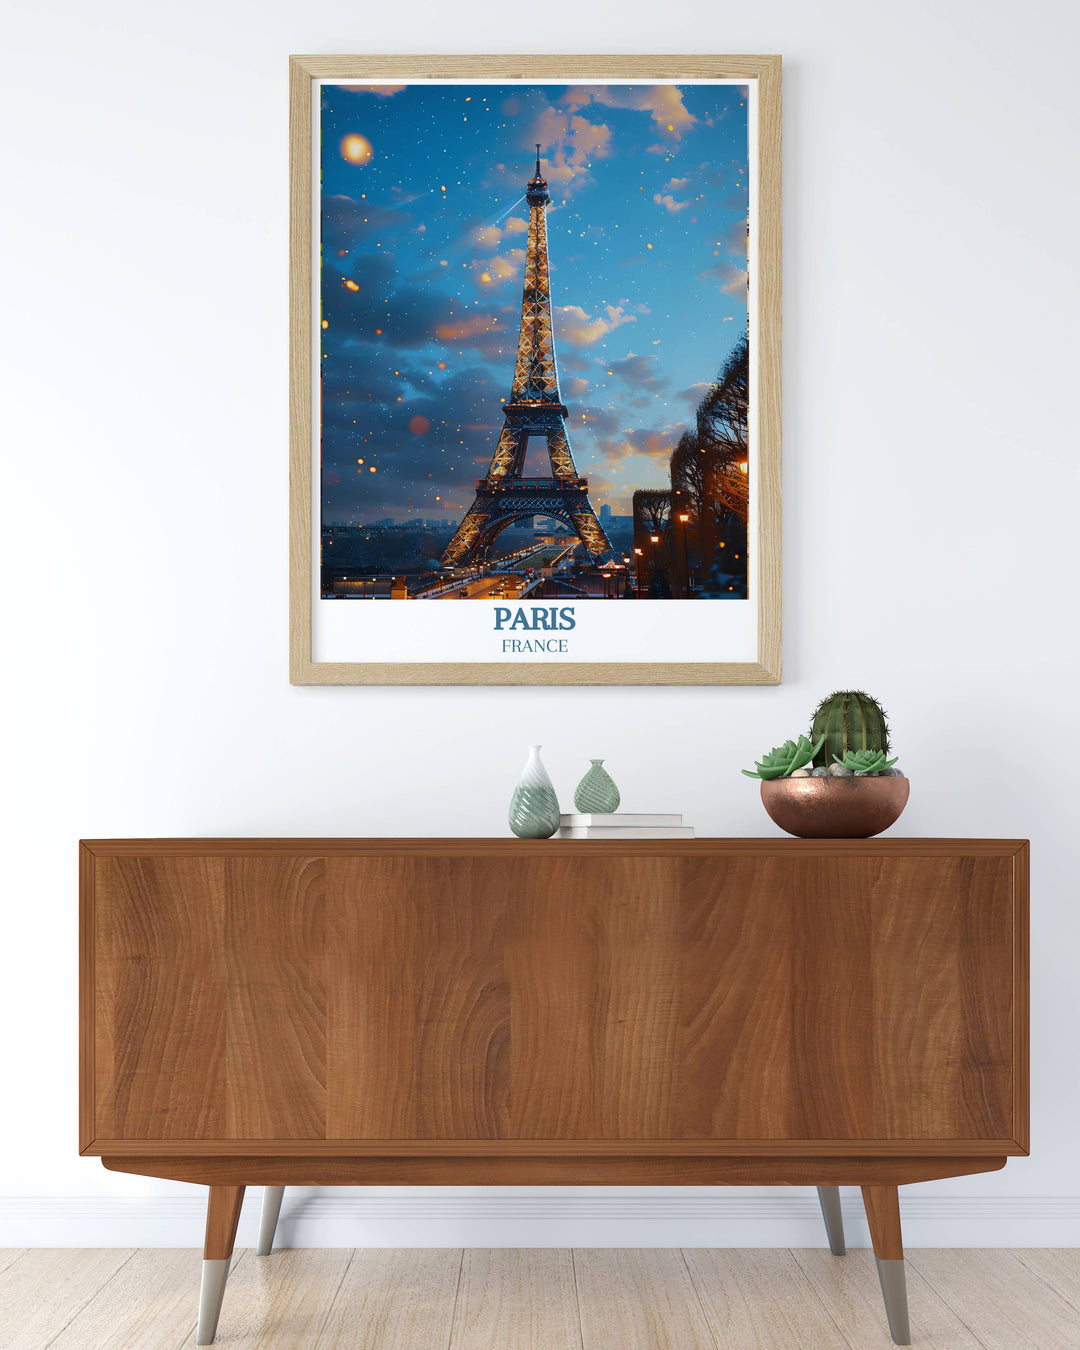 Adorn your walls with the elegance of the Eiffel Tower with our custom prints, perfect for adding a touch of Parisian charm to any space.